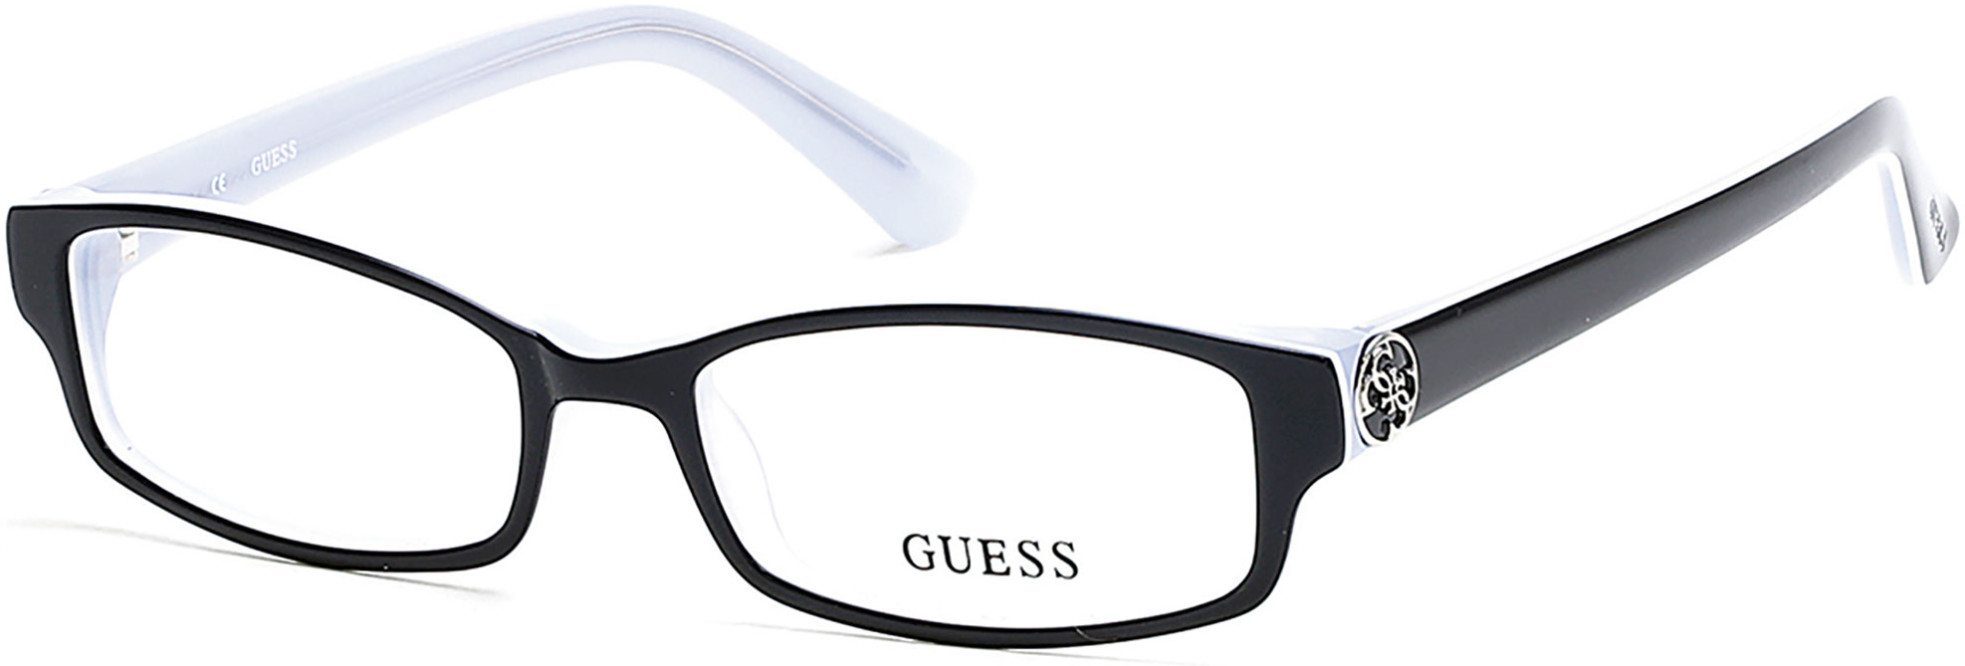 GUESS 2526